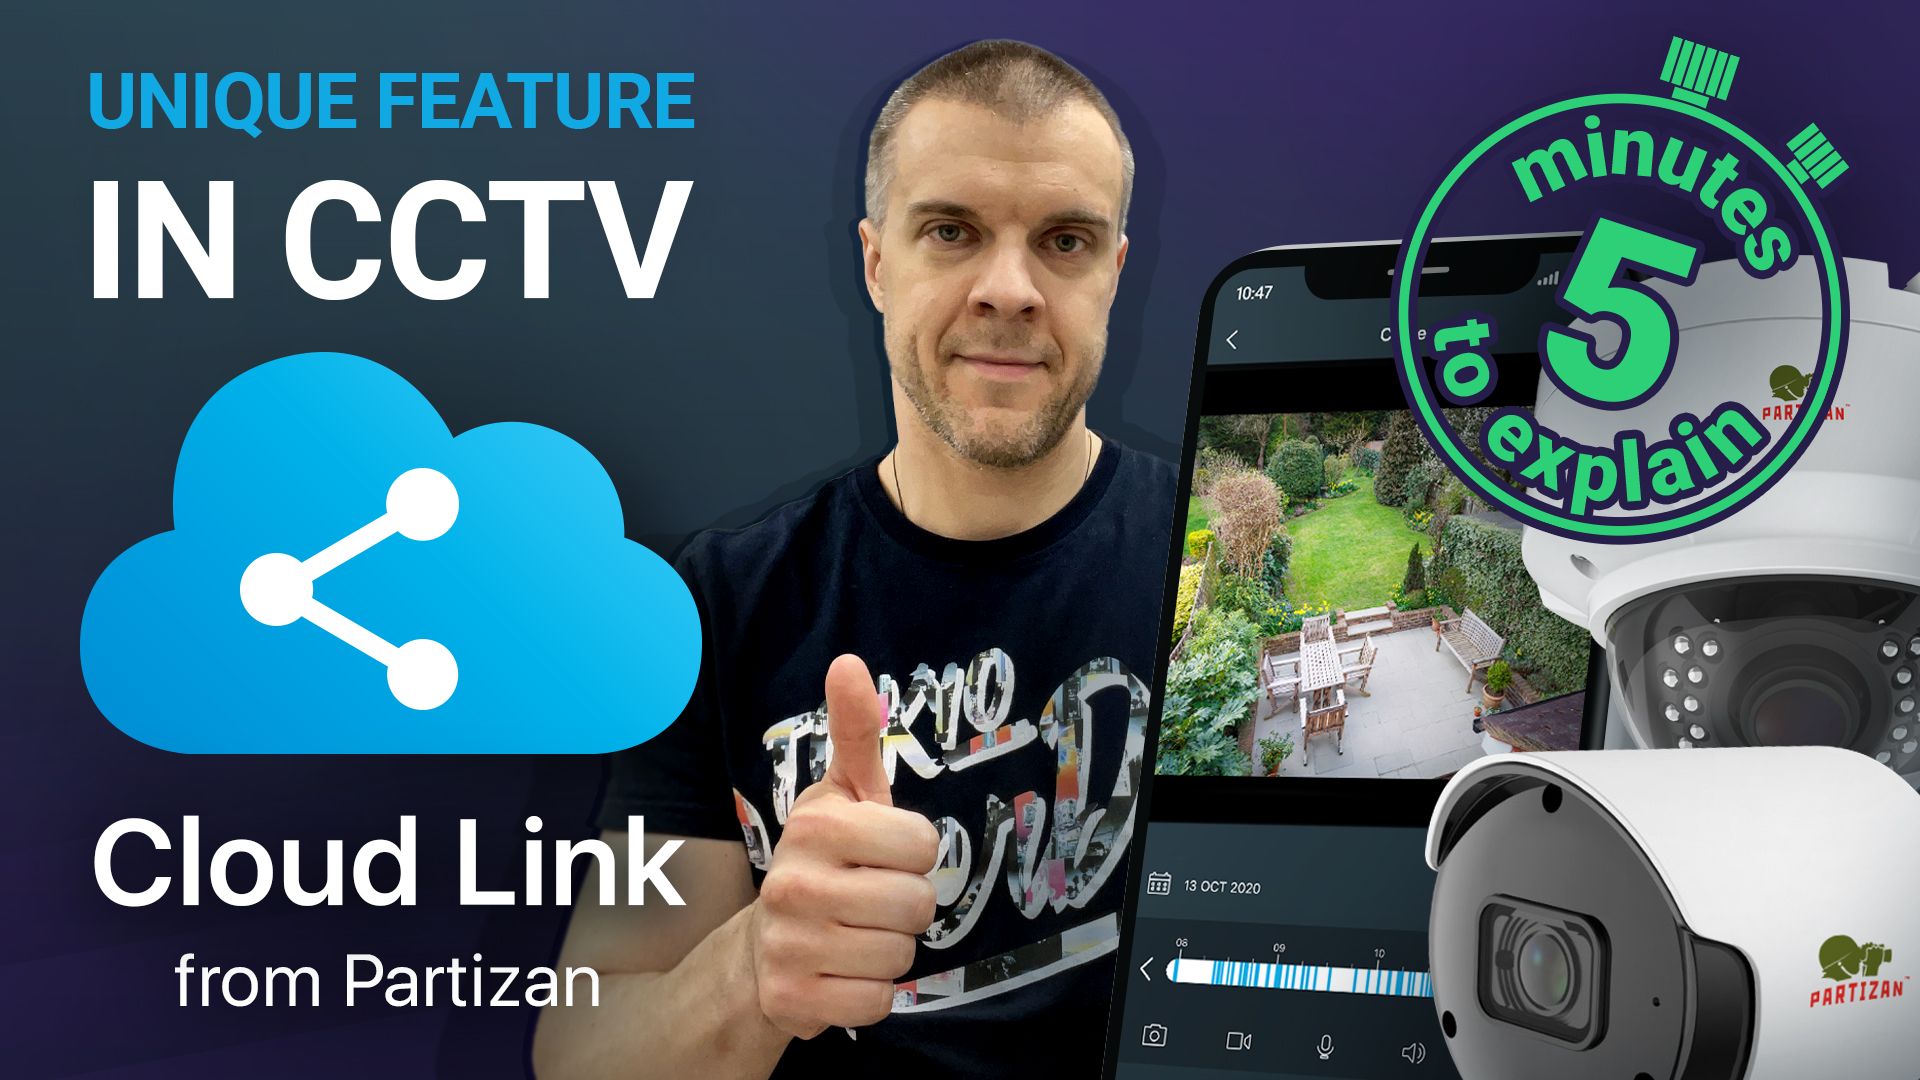 Unique feature in CCTV: cloud link from Partizan